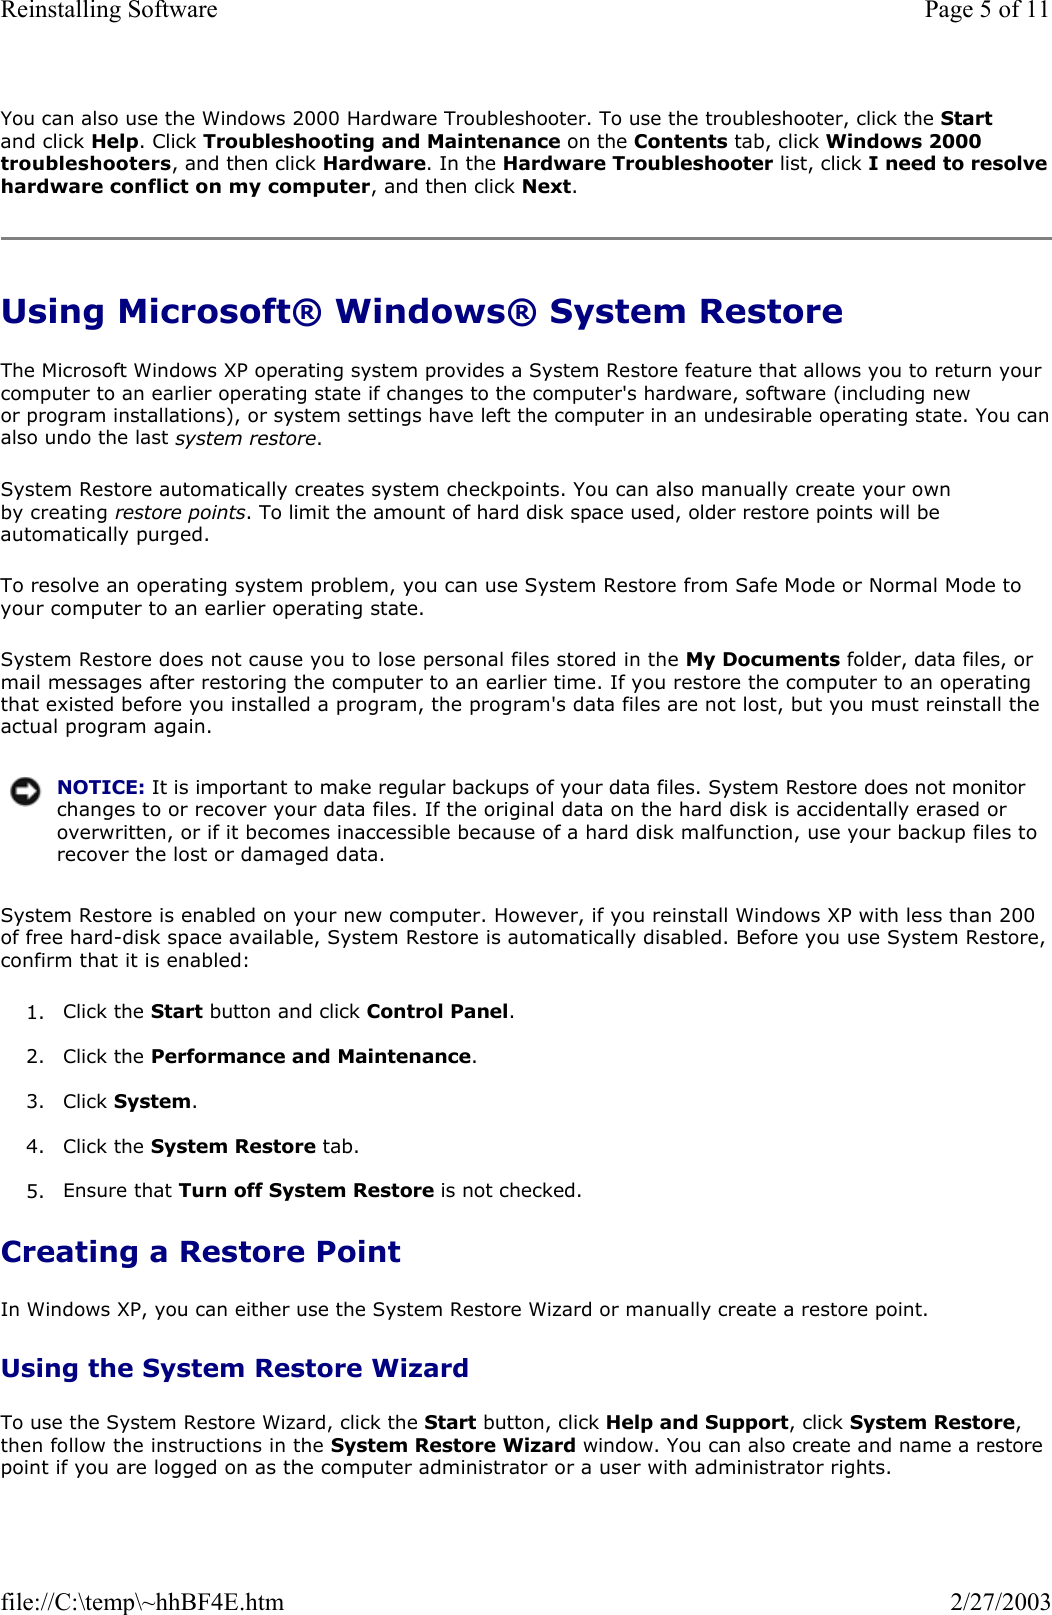 You can also use the Windows 2000 Hardware Troubleshooter. To use the troubleshooter, click the Start and click Help. Click Troubleshooting and Maintenance on the Contents tab, click Windows 2000 troubleshooters, and then click Hardware. In the Hardware Troubleshooter list, click I need to resolve hardware conflict on my computer, and then click Next. Using Microsoft® Windows® System Restore The Microsoft Windows XP operating system provides a System Restore feature that allows you to return your computer to an earlier operating state if changes to the computer&apos;s hardware, software (including new or program installations), or system settings have left the computer in an undesirable operating state. You canalso undo the last system restore. System Restore automatically creates system checkpoints. You can also manually create your own by creating restore points. To limit the amount of hard disk space used, older restore points will be automatically purged. To resolve an operating system problem, you can use System Restore from Safe Mode or Normal Mode to your computer to an earlier operating state. System Restore does not cause you to lose personal files stored in the My Documents folder, data files, or mail messages after restoring the computer to an earlier time. If you restore the computer to an operating that existed before you installed a program, the program&apos;s data files are not lost, but you must reinstall the actual program again.  System Restore is enabled on your new computer. However, if you reinstall Windows XP with less than 200 of free hard-disk space available, System Restore is automatically disabled. Before you use System Restore, confirm that it is enabled: 1. Click the Start button and click Control Panel.   2. Click the Performance and Maintenance.  3. Click System.  4. Click the System Restore tab.  5. Ensure that Turn off System Restore is not checked.   Creating a Restore Point In Windows XP, you can either use the System Restore Wizard or manually create a restore point. Using the System Restore Wizard To use the System Restore Wizard, click the Start button, click Help and Support, click System Restore, then follow the instructions in the System Restore Wizard window. You can also create and name a restore point if you are logged on as the computer administrator or a user with administrator rights. NOTICE: It is important to make regular backups of your data files. System Restore does not monitor changes to or recover your data files. If the original data on the hard disk is accidentally erased or overwritten, or if it becomes inaccessible because of a hard disk malfunction, use your backup files to recover the lost or damaged data.Page 5 of 11Reinstalling Software2/27/2003file://C:\temp\~hhBF4E.htm